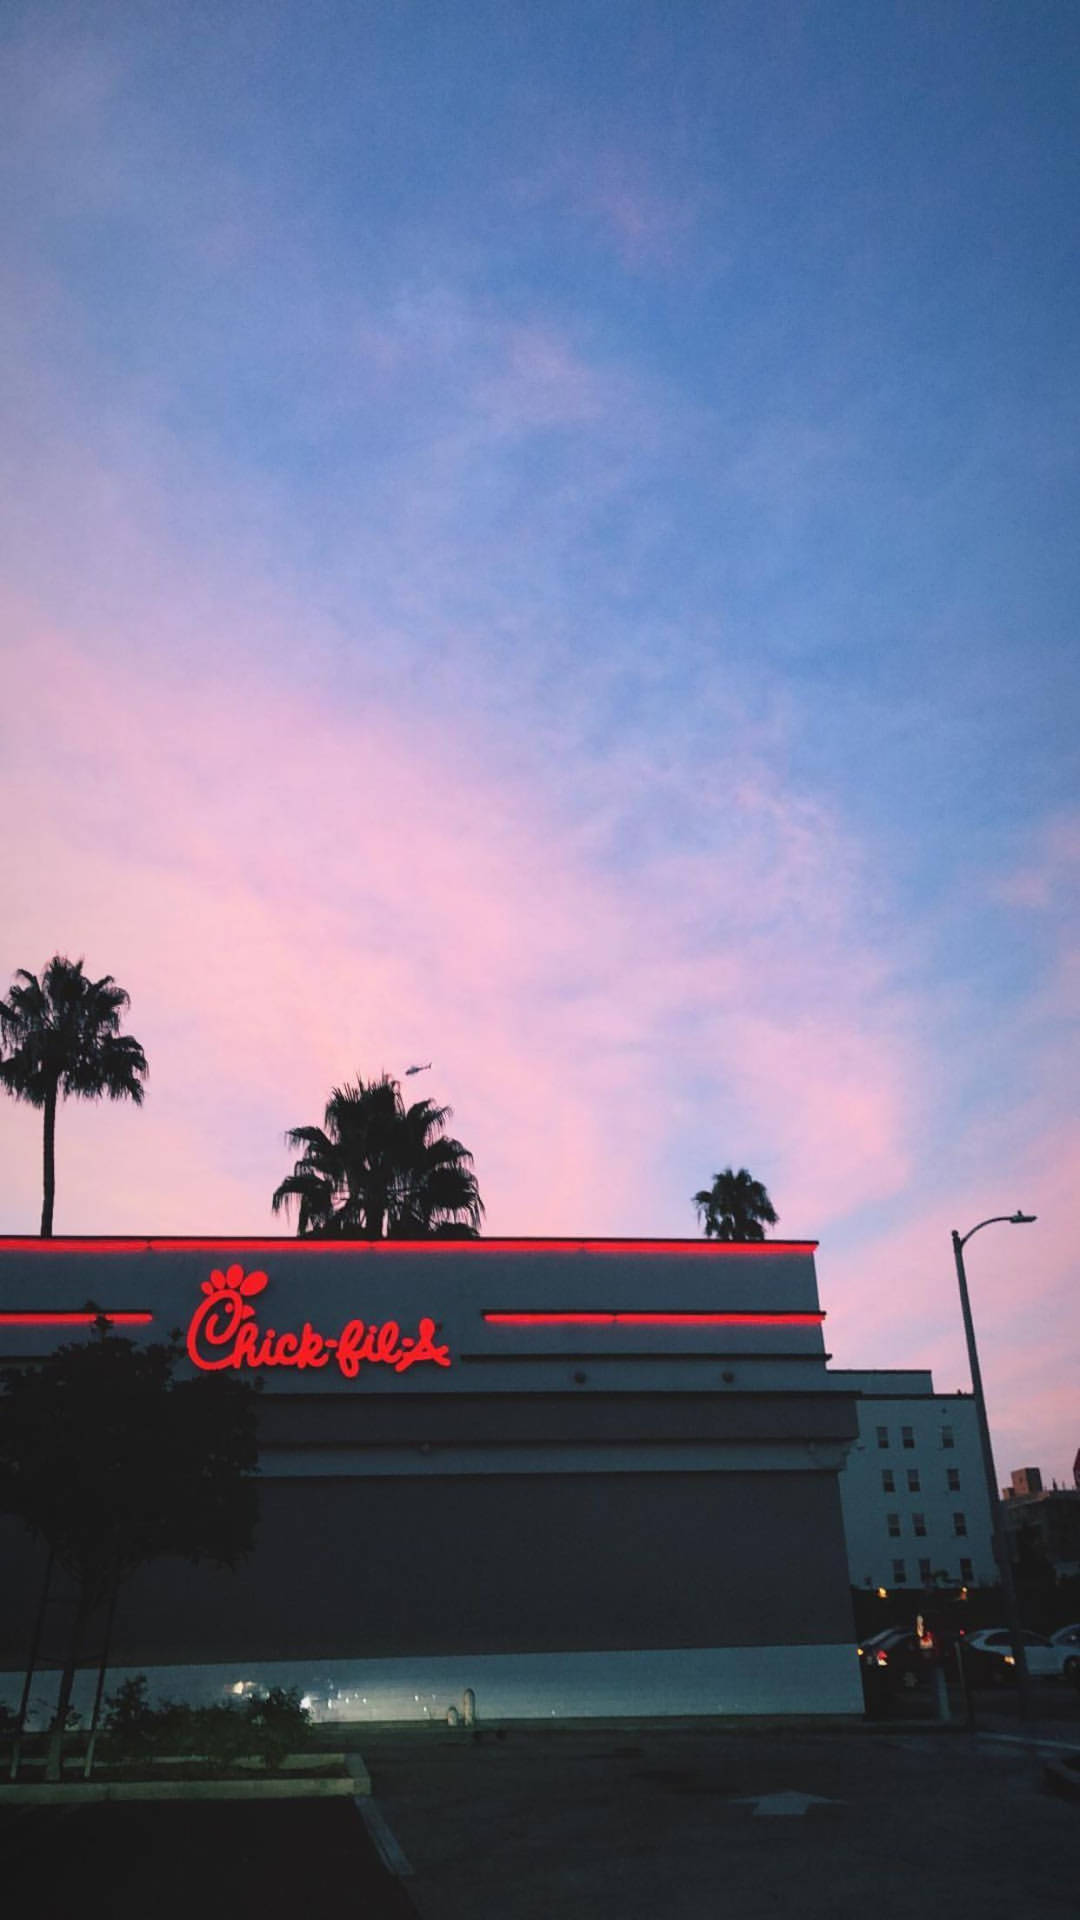 Aesthetic Chick Fil A Signage Background